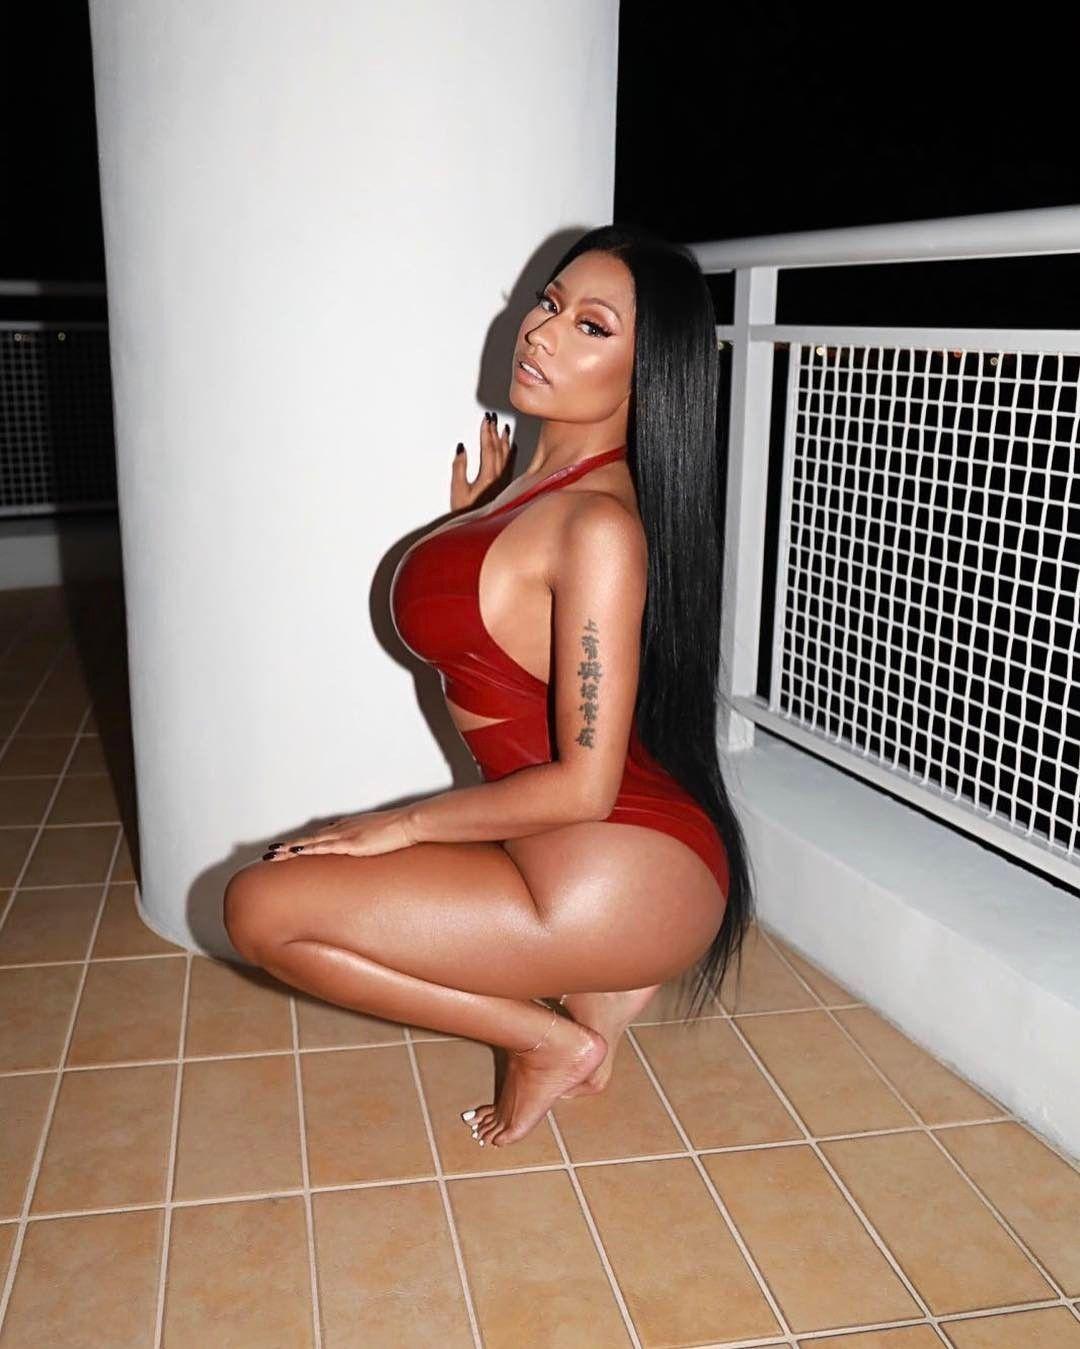 49 Sexy Nicki Minaj Feet Pictures Will Make You Bow Down To This Goddess | Best Of Comic Books